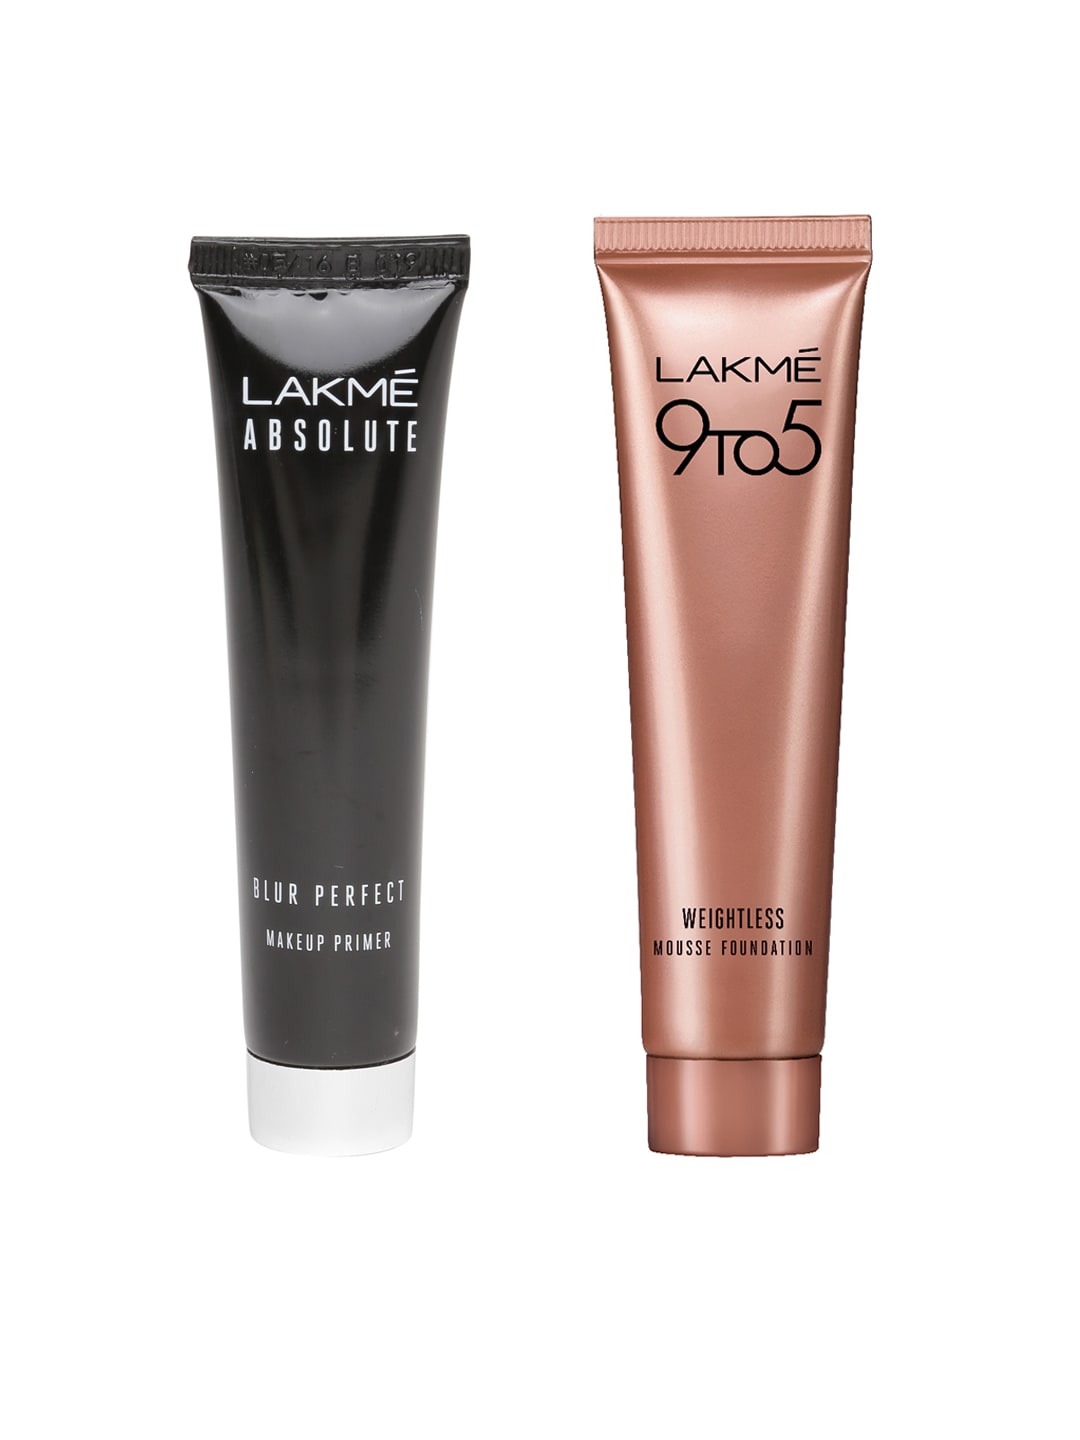 Lakme Set of Primer & Mousse Foundation Price in India